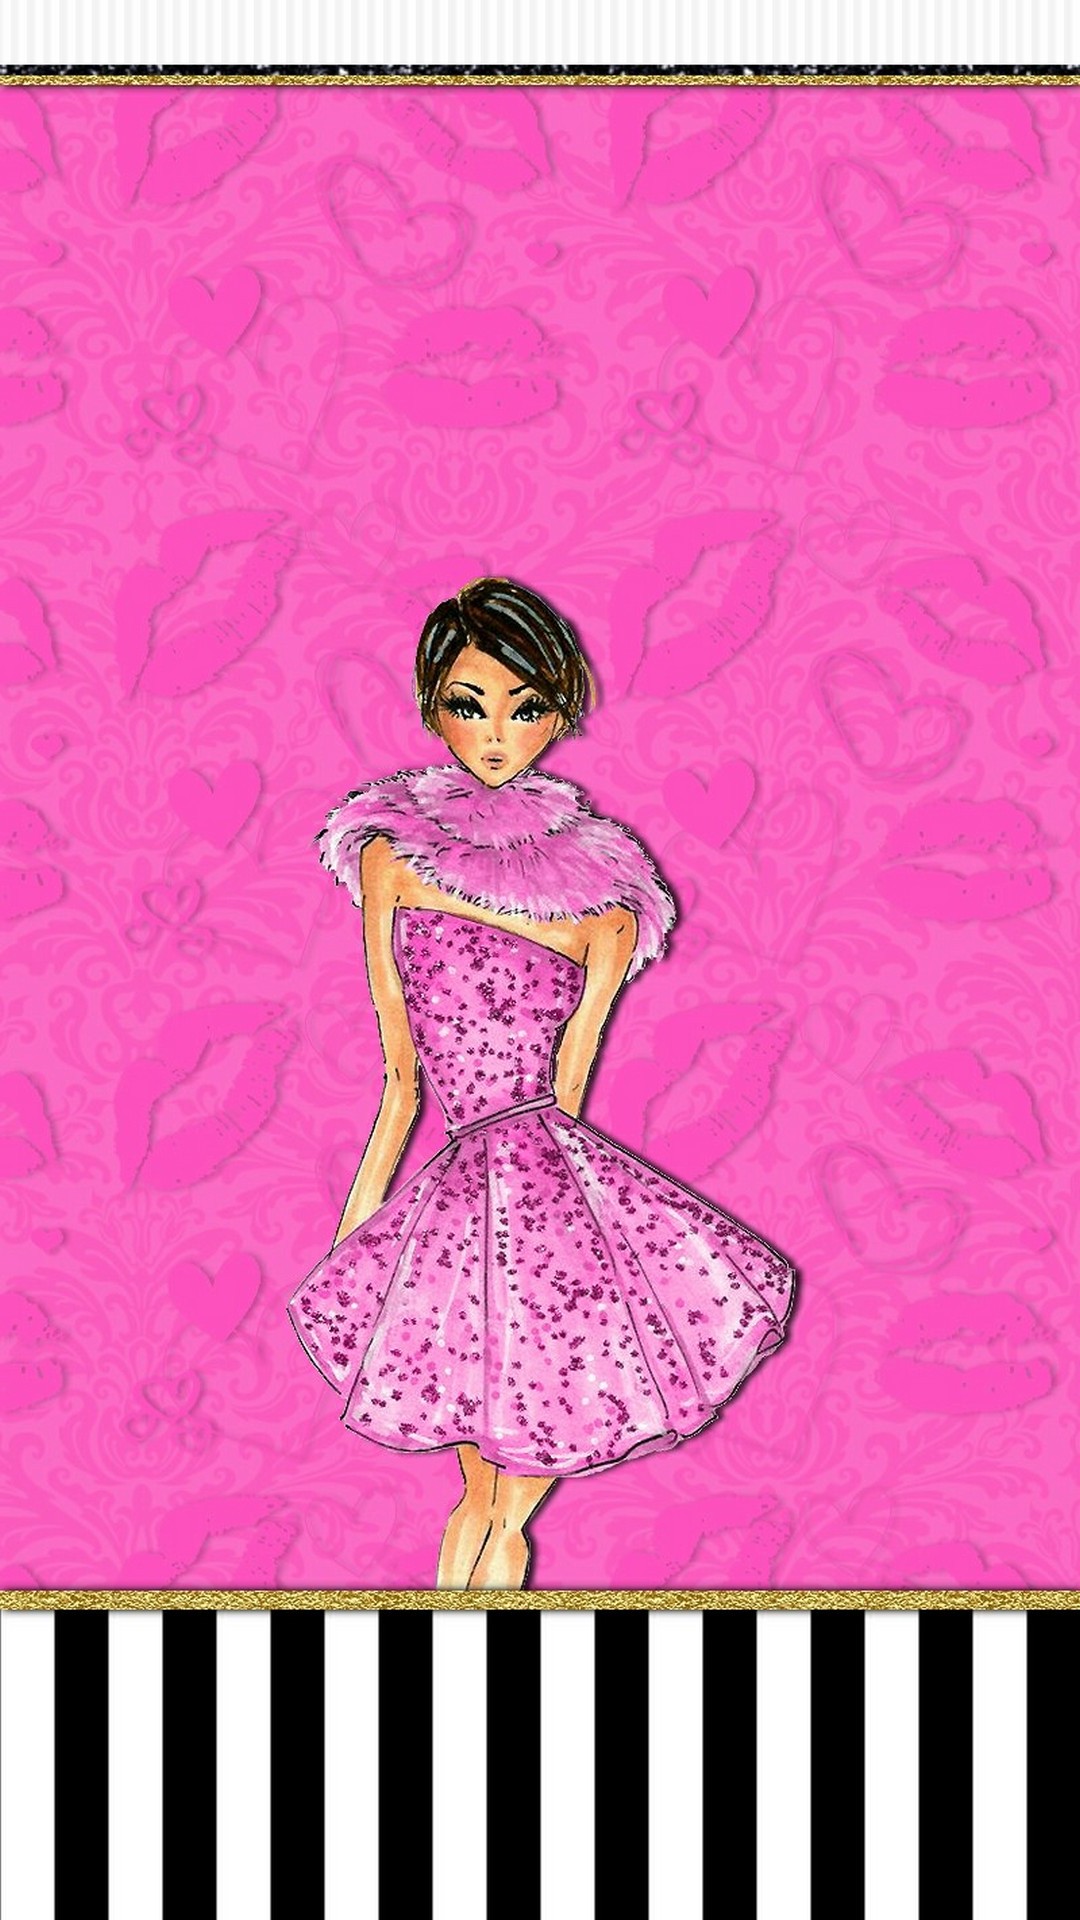 Pink Girly Wallpaper Android with HD resolution 1080x1920